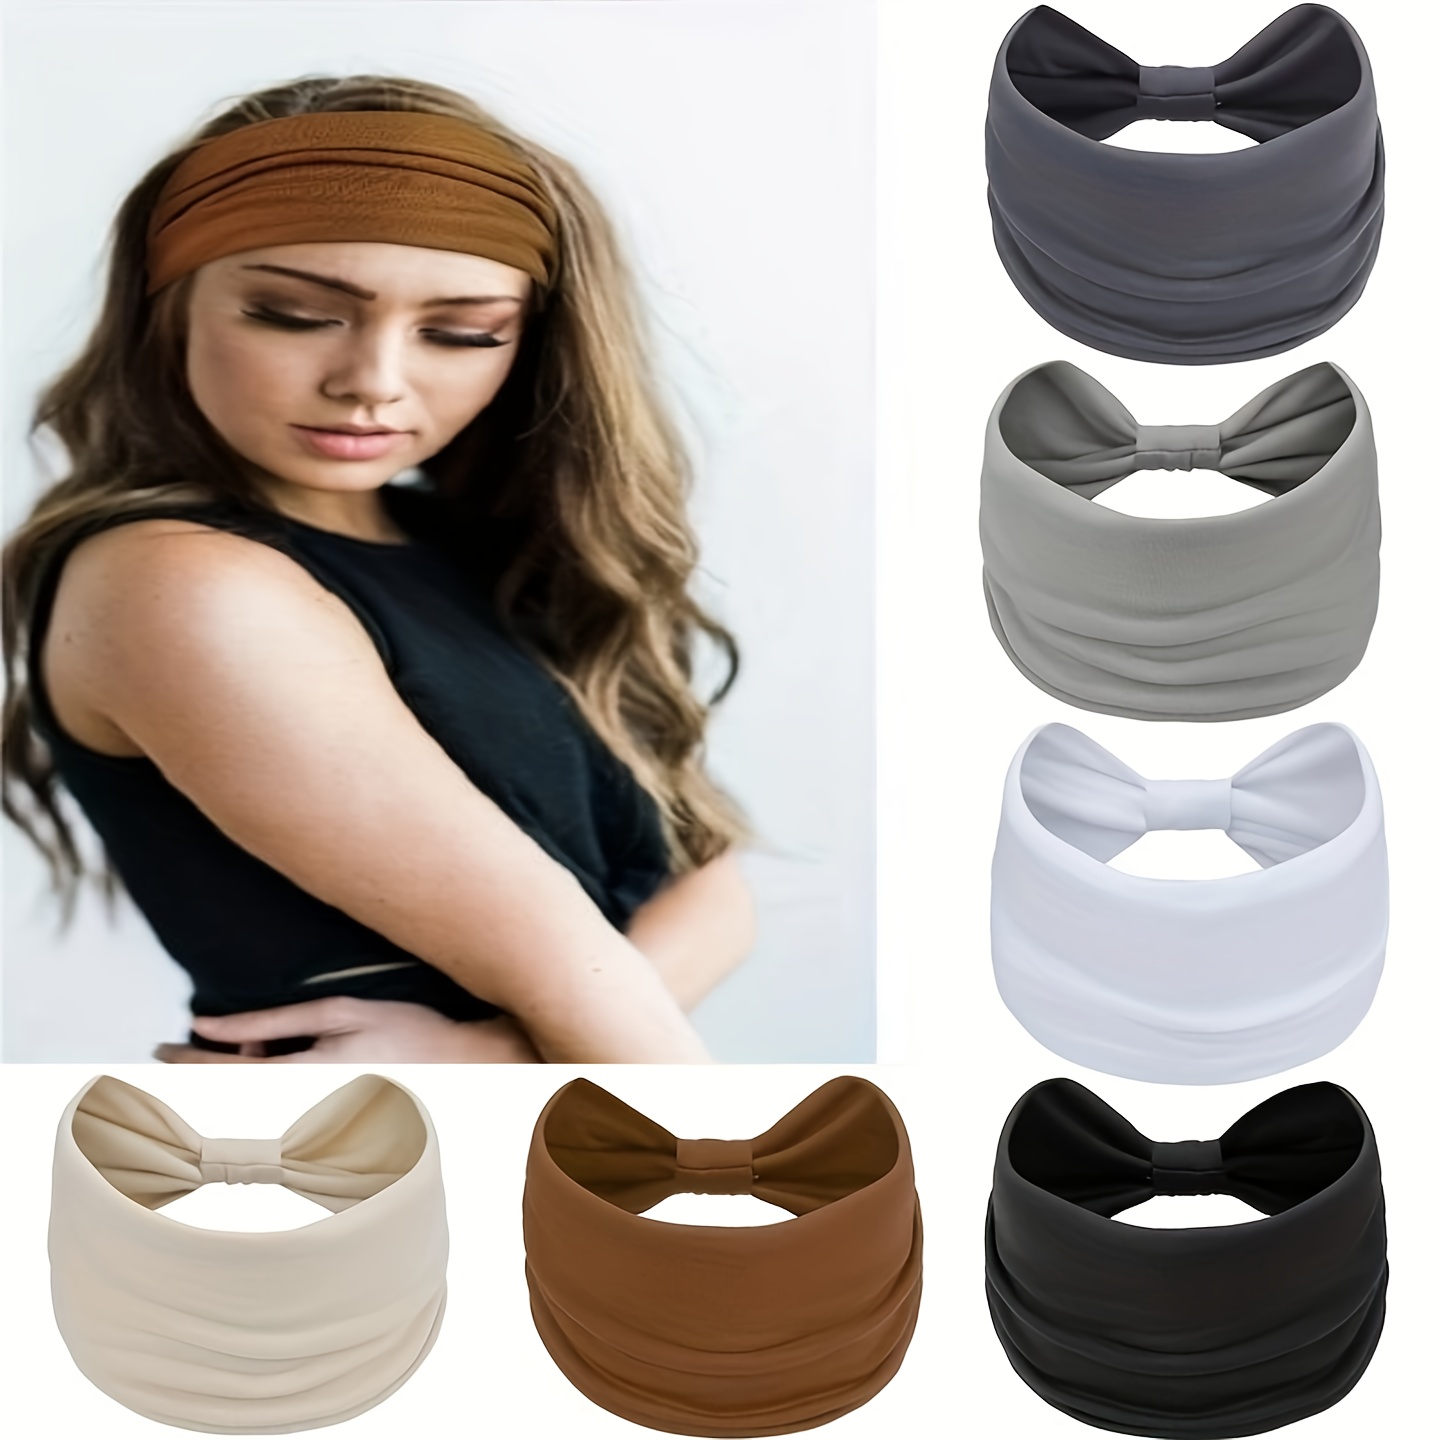 

6pcs/pack Women's Wide Headbands, Solid Color Knot Turban, Large Boho Style Hair Accessories, Yoga Running Sport, Multi-functional Hair Bands